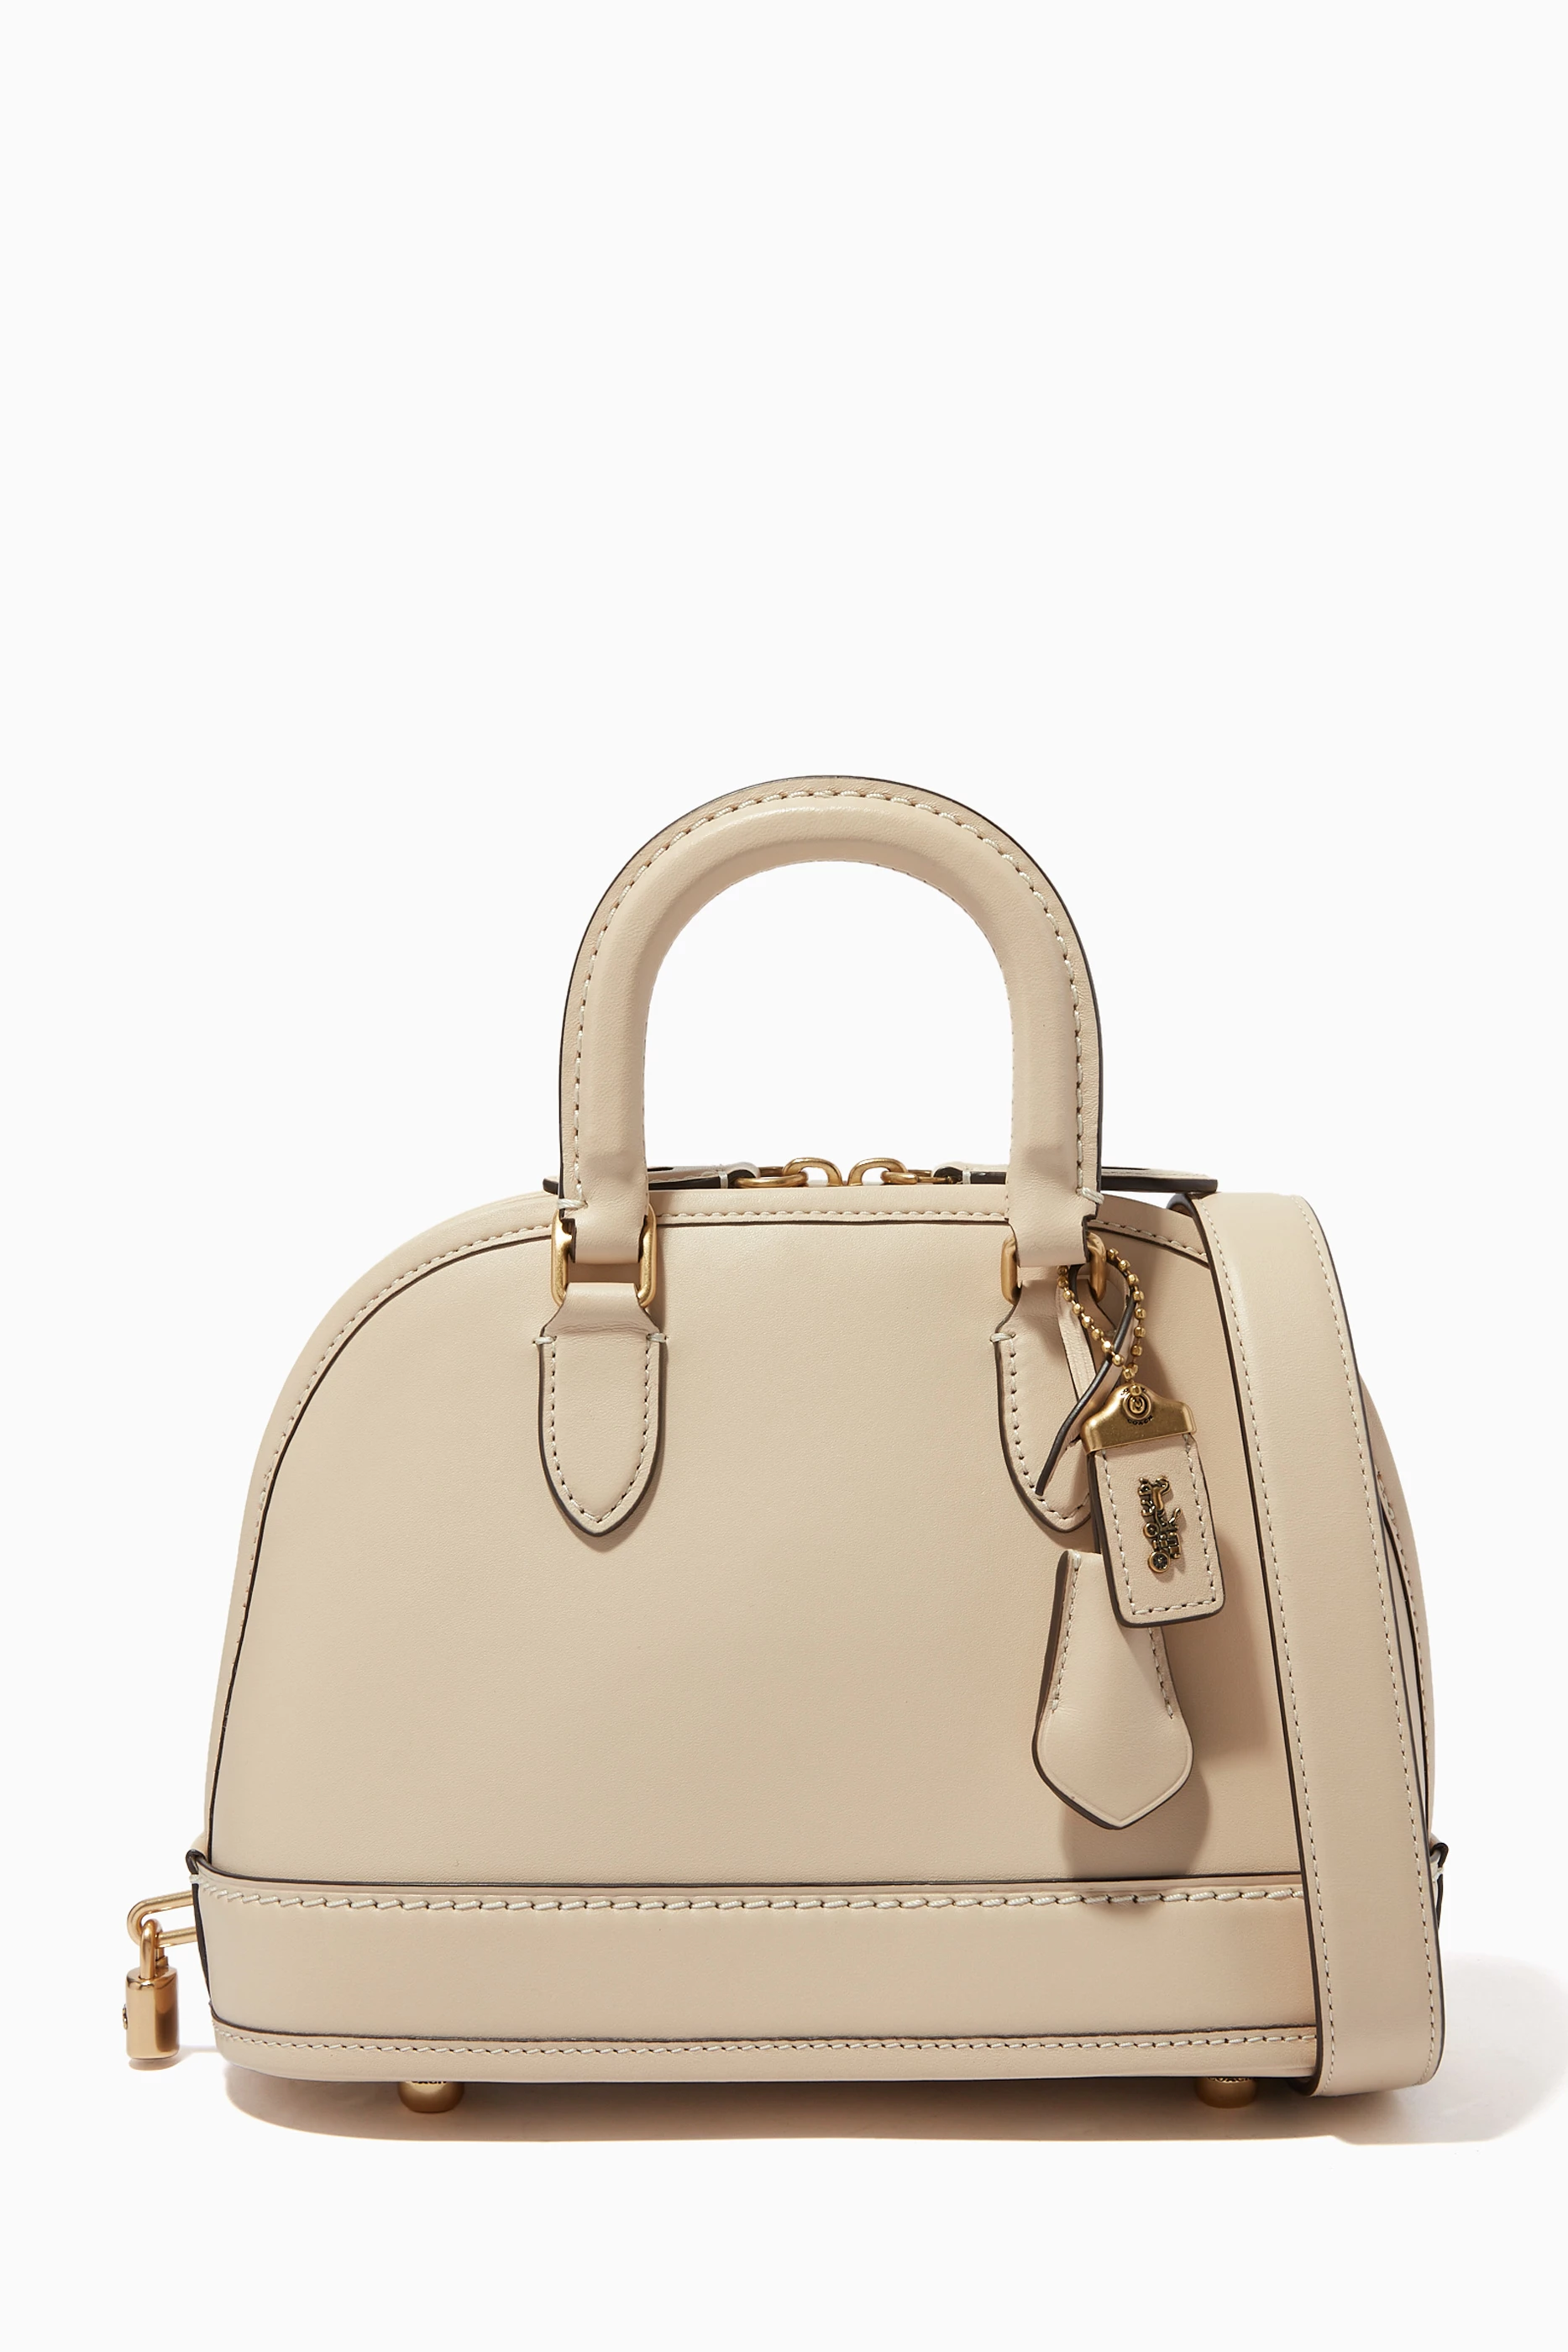 Coach Revel 2 Glove-Tanned Leather Top-Handle Bag